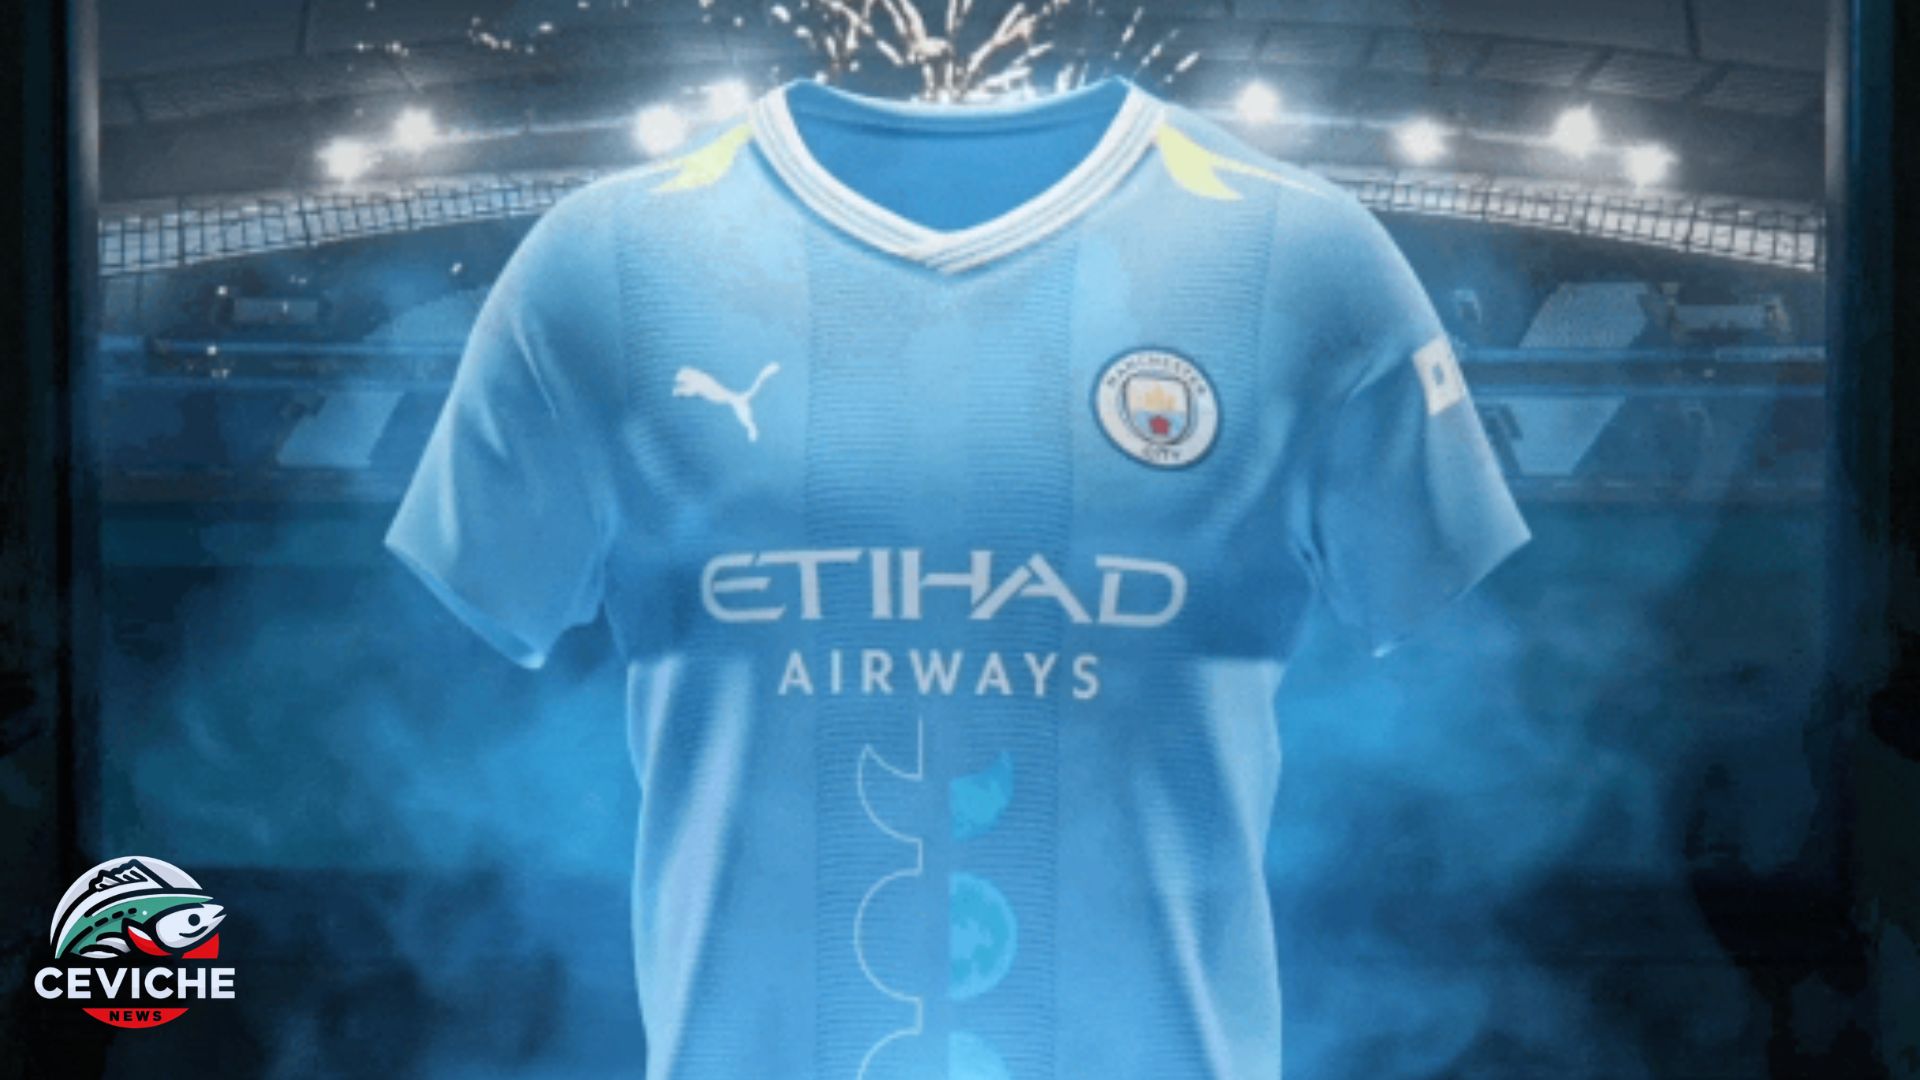 Manchester City has released a collectible t-shirt with NFT technology